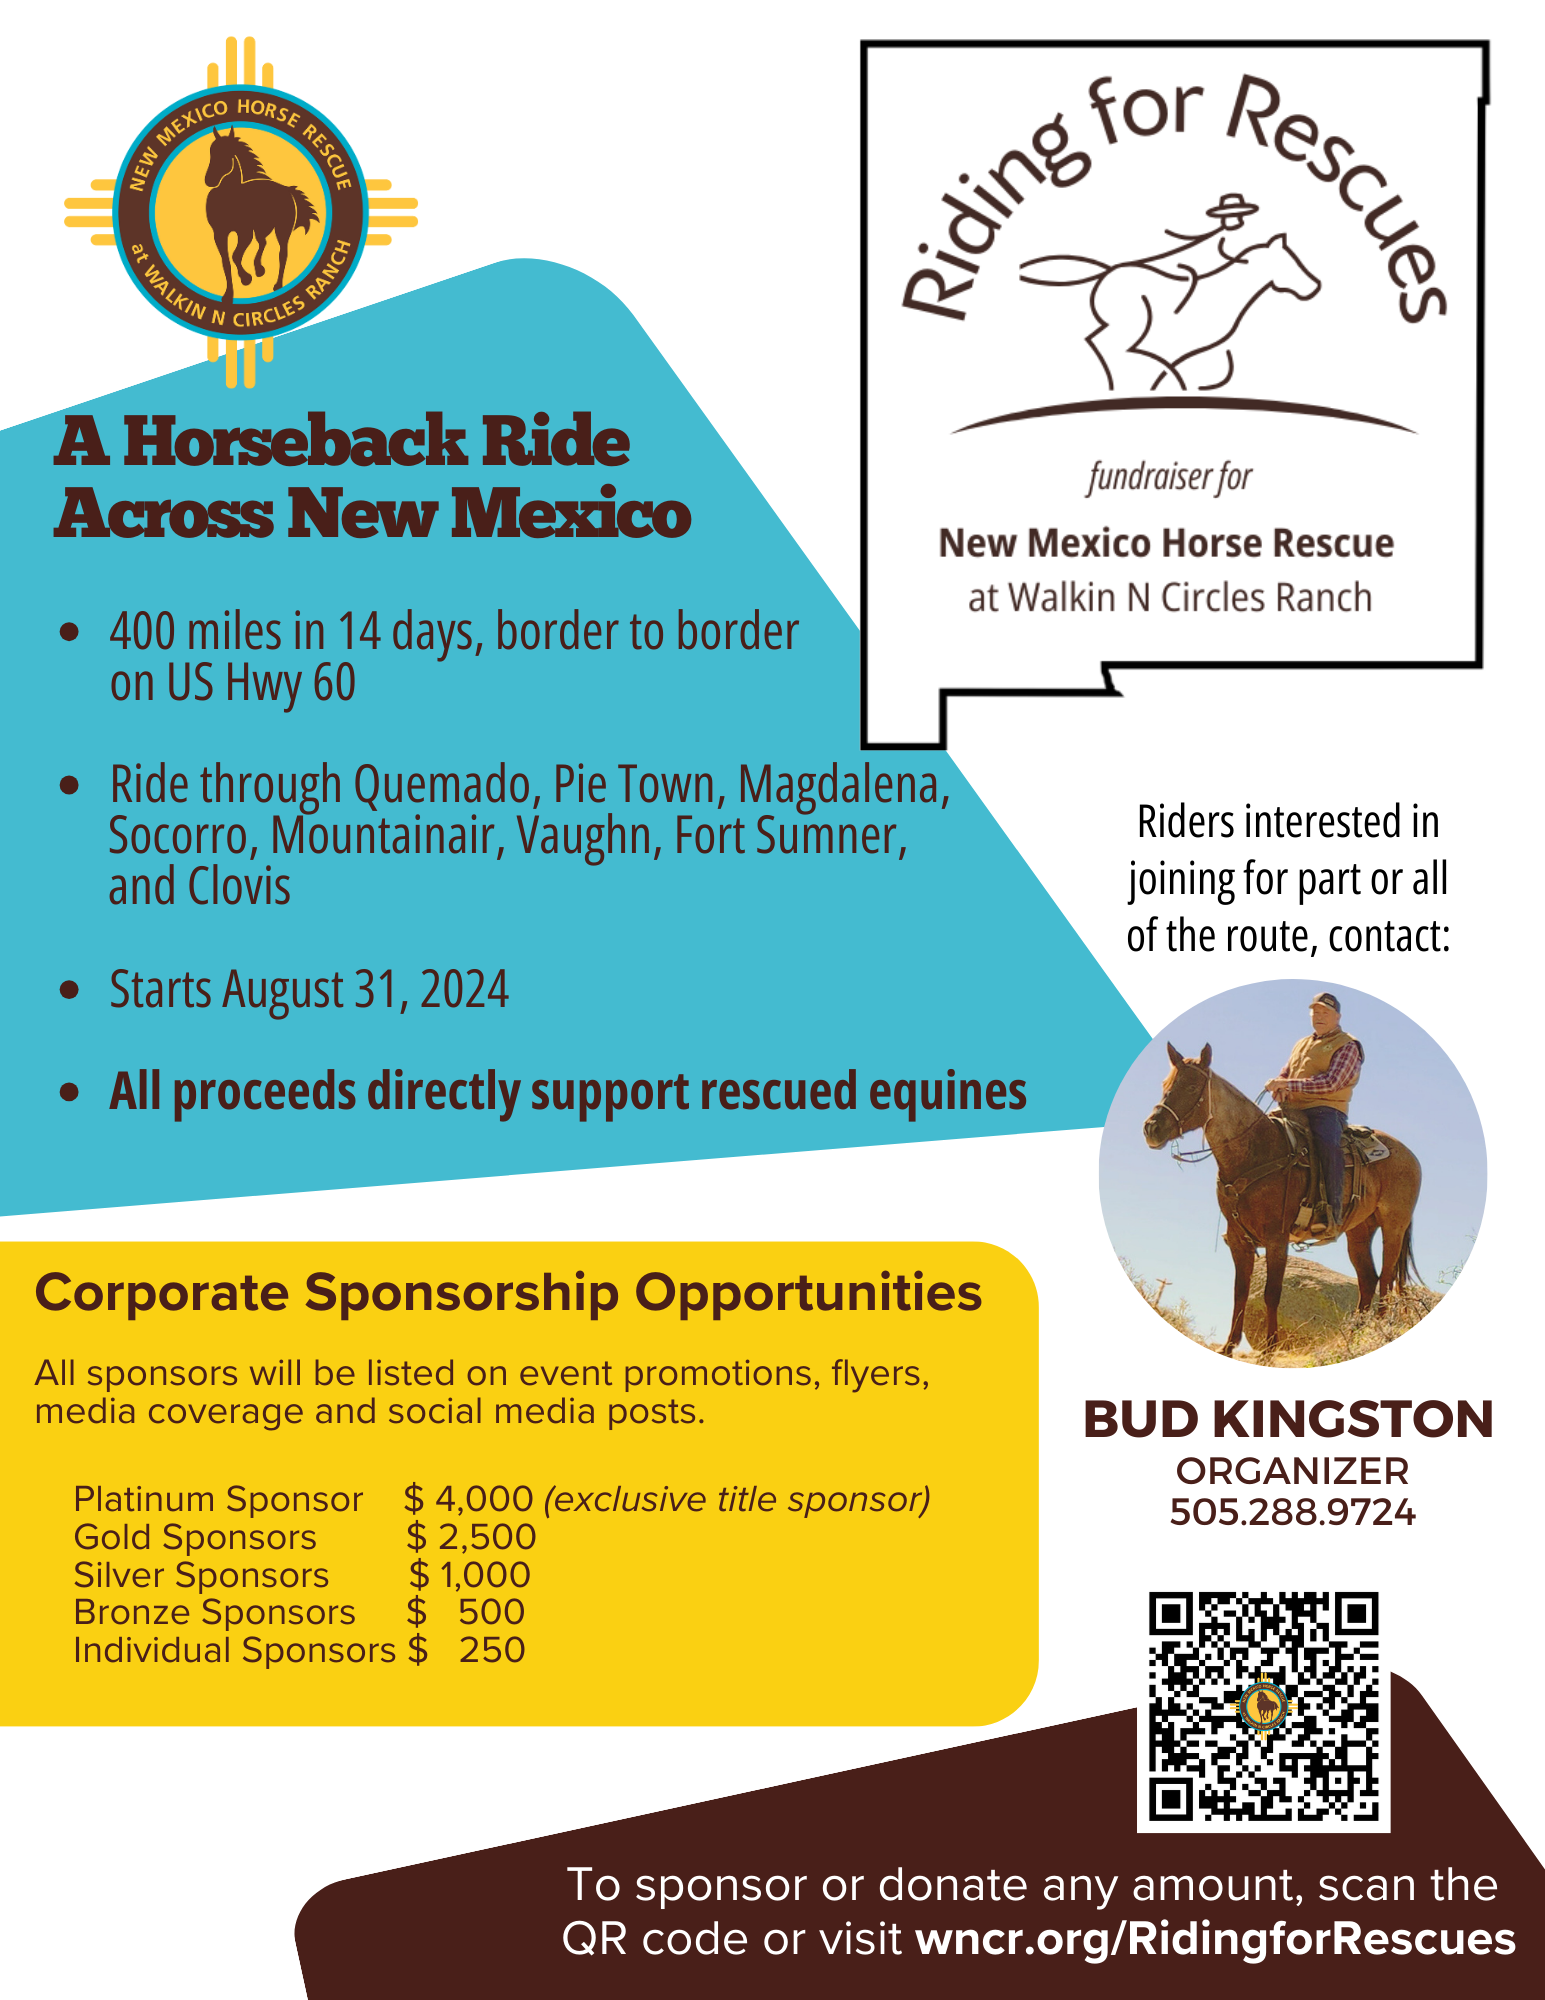 RIDING FOR RESCUES Fundraiser